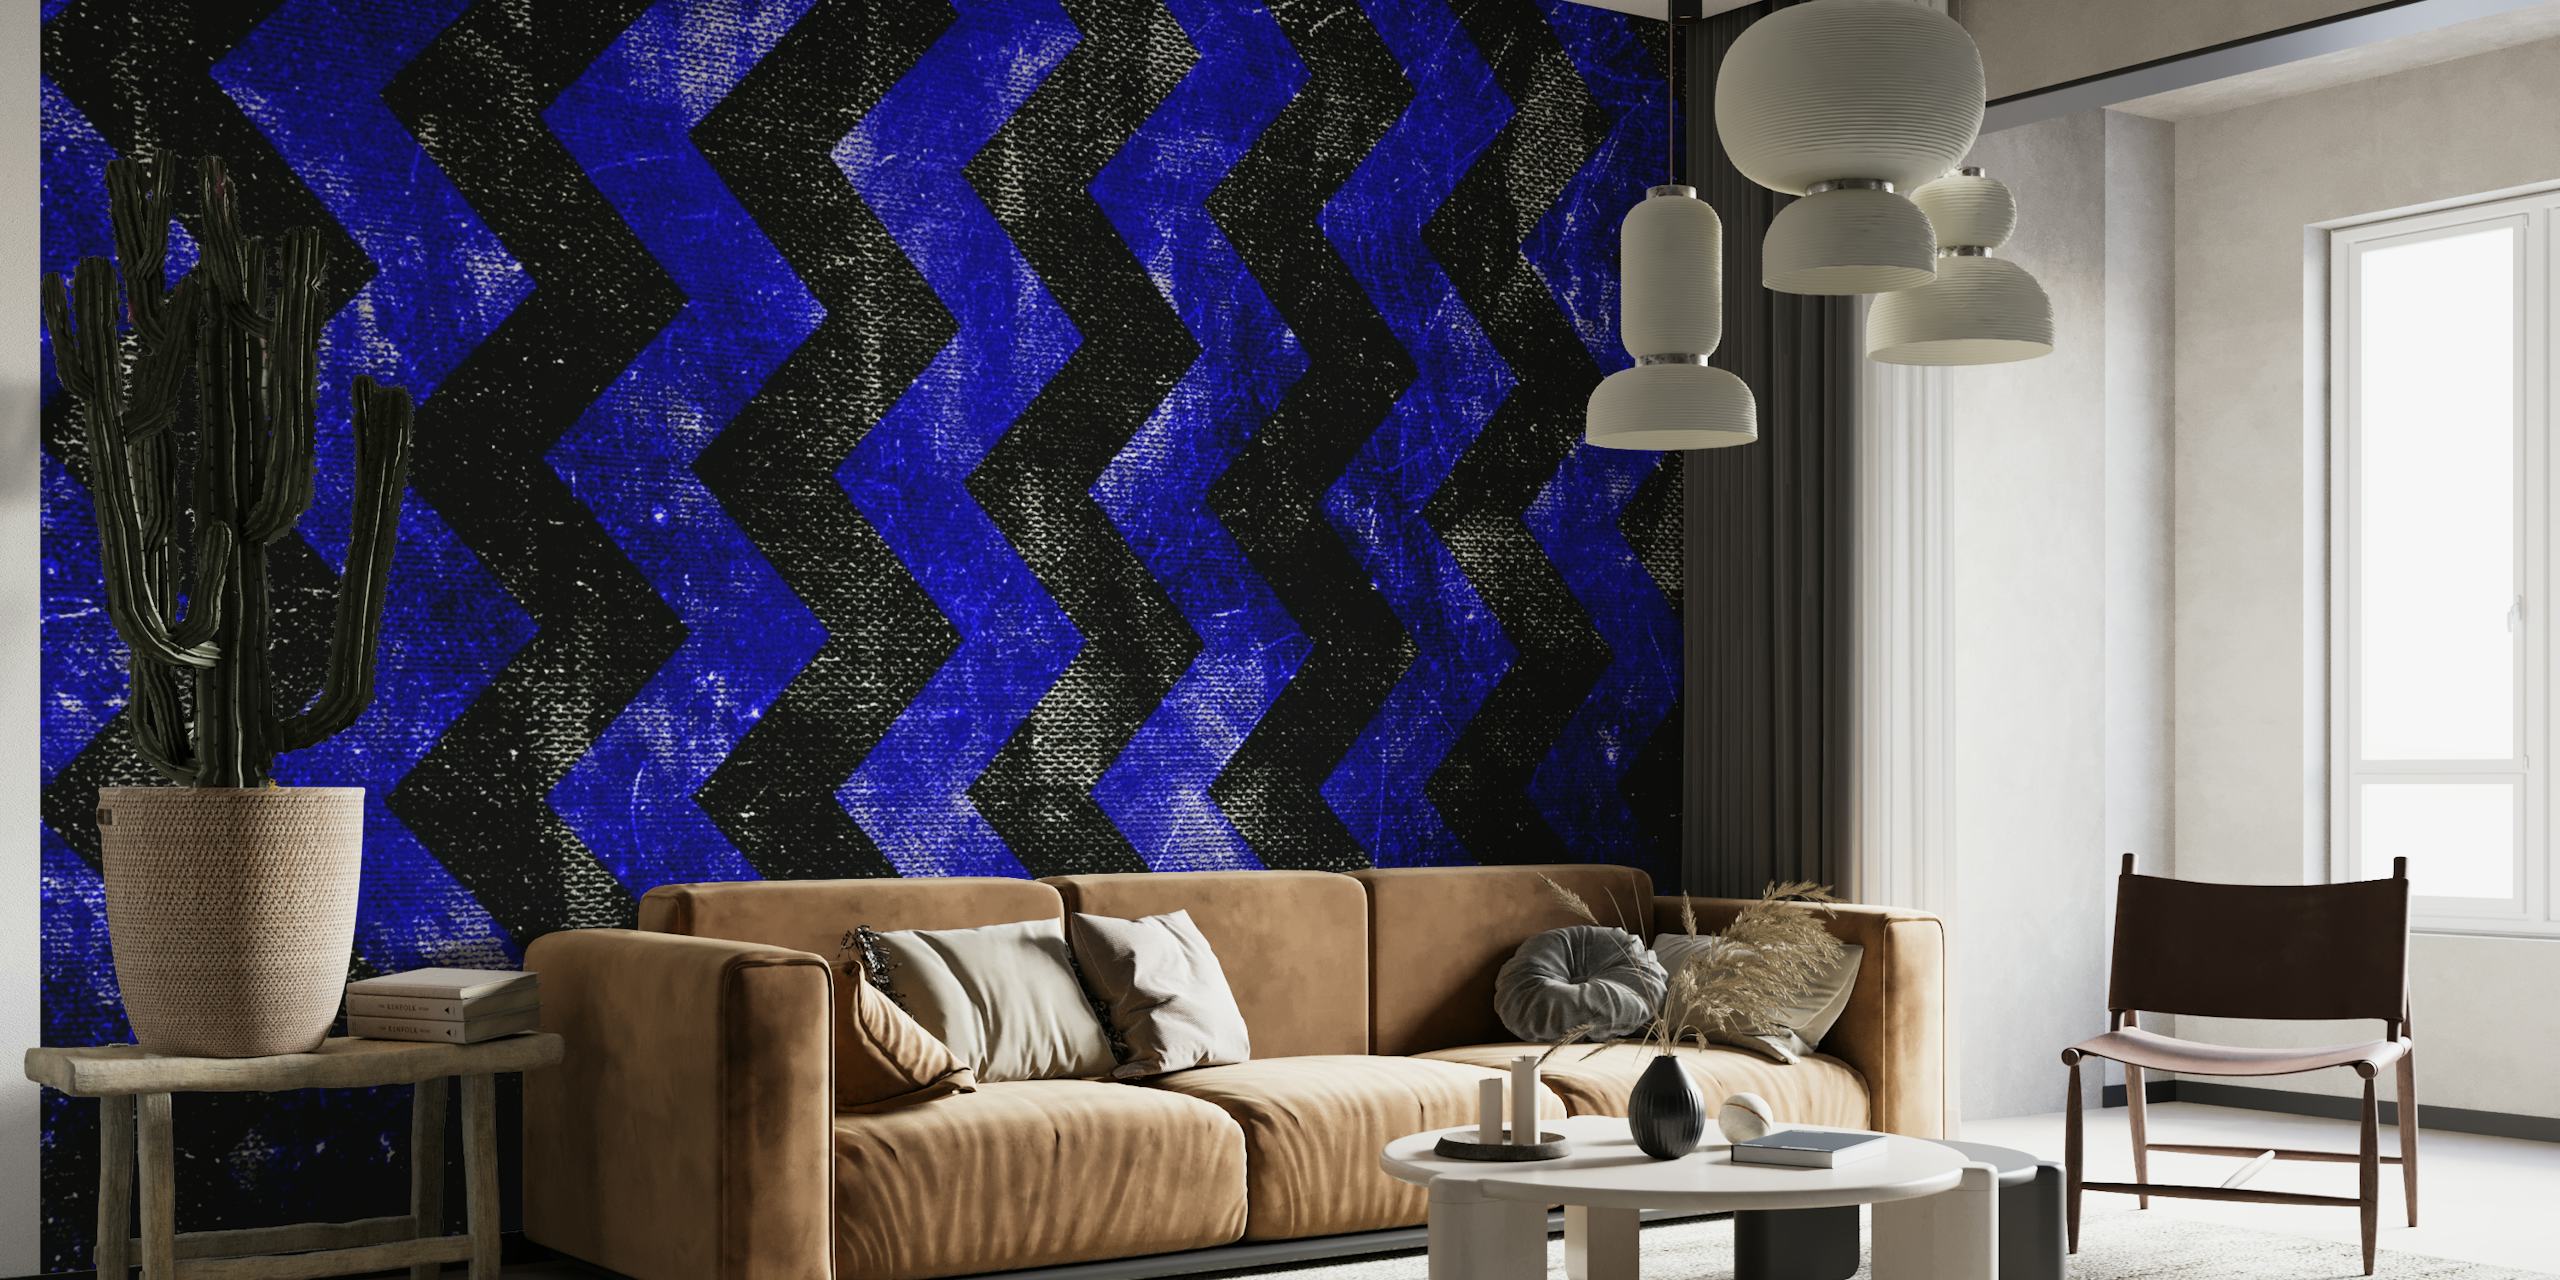 Abstract blue lines wall mural creating a three-dimensional zigzag pattern on a dark background